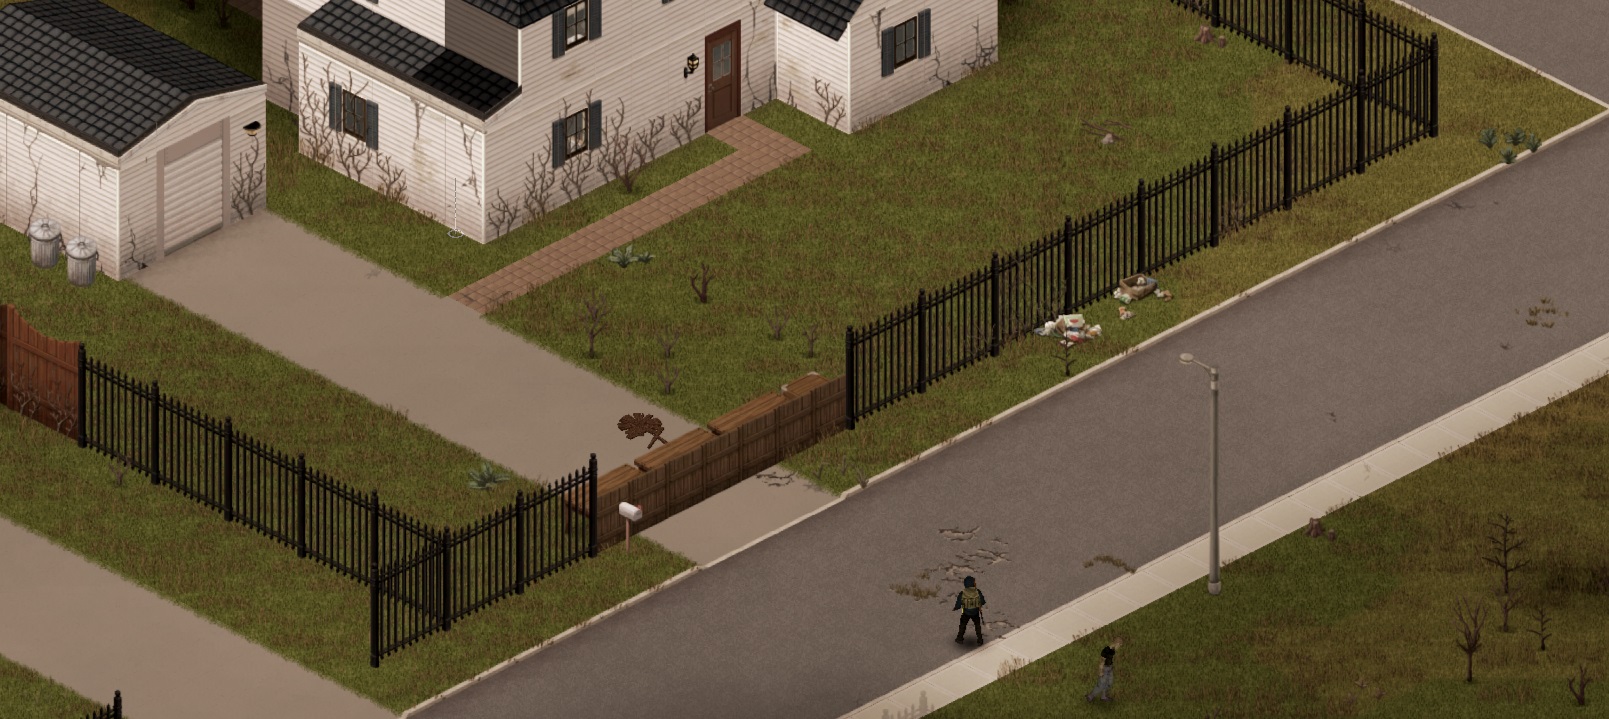 Project Zomboid - Basics of Base Building - Securty and Defense - D10C5E3